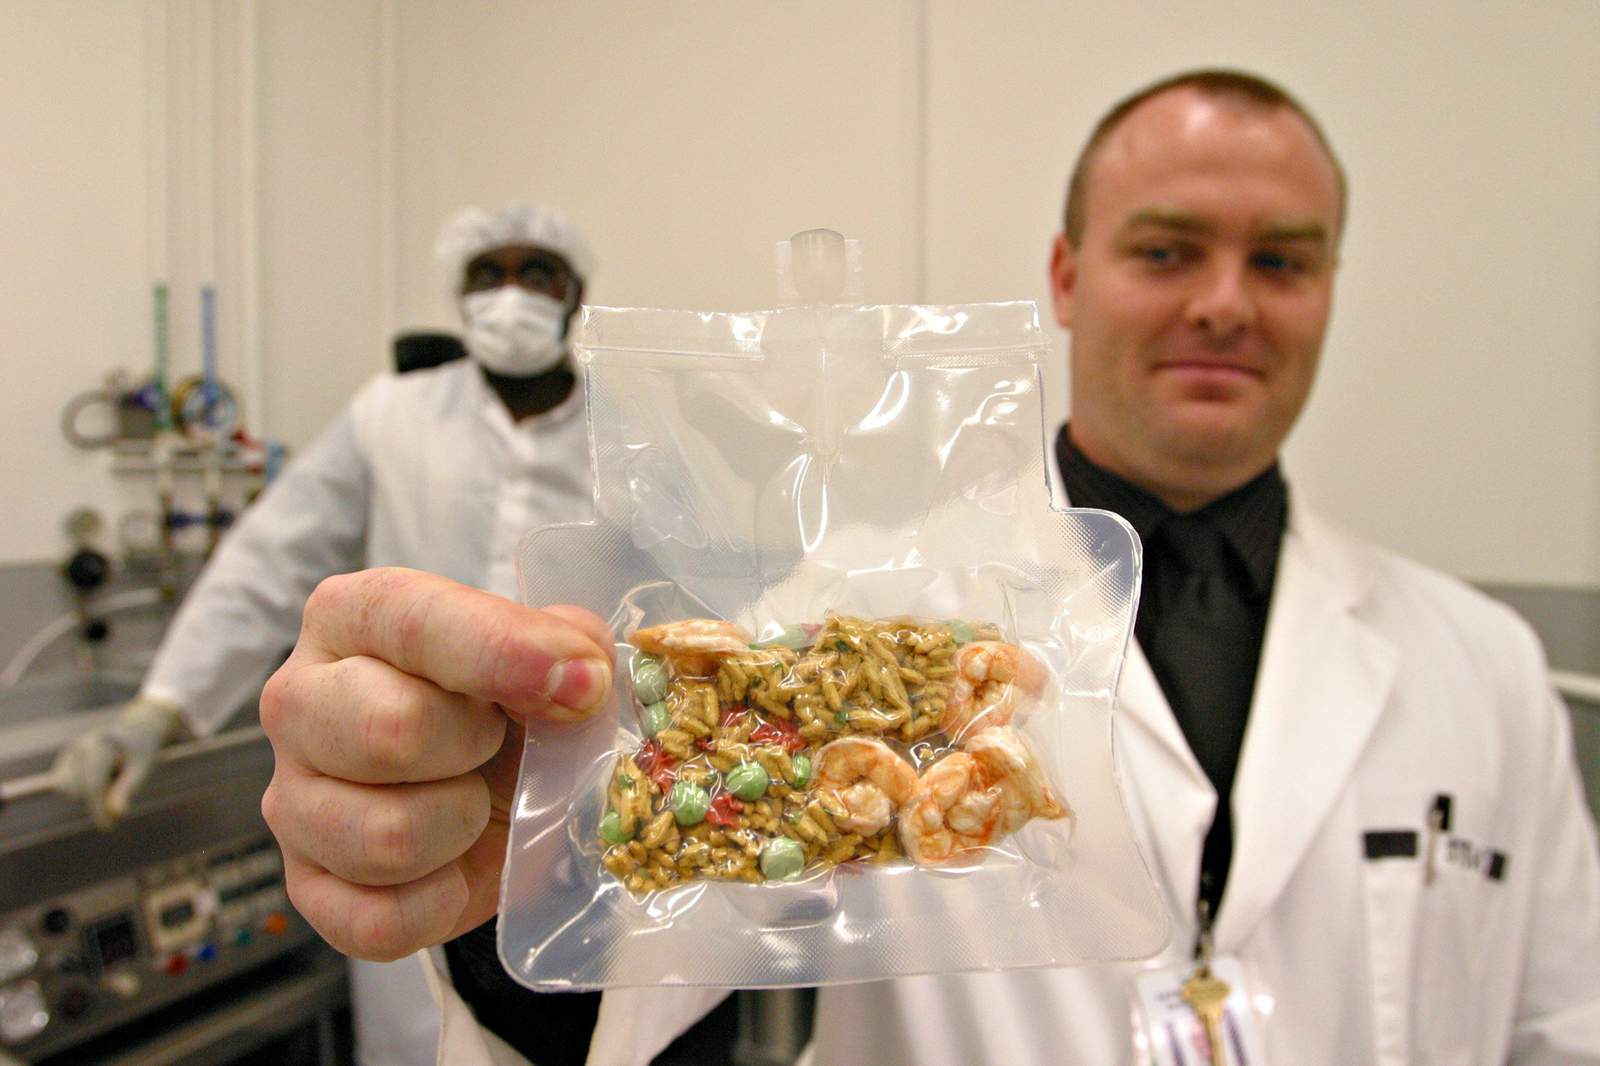 Eat like an astronaut: What’s for dinner on the International Space Station